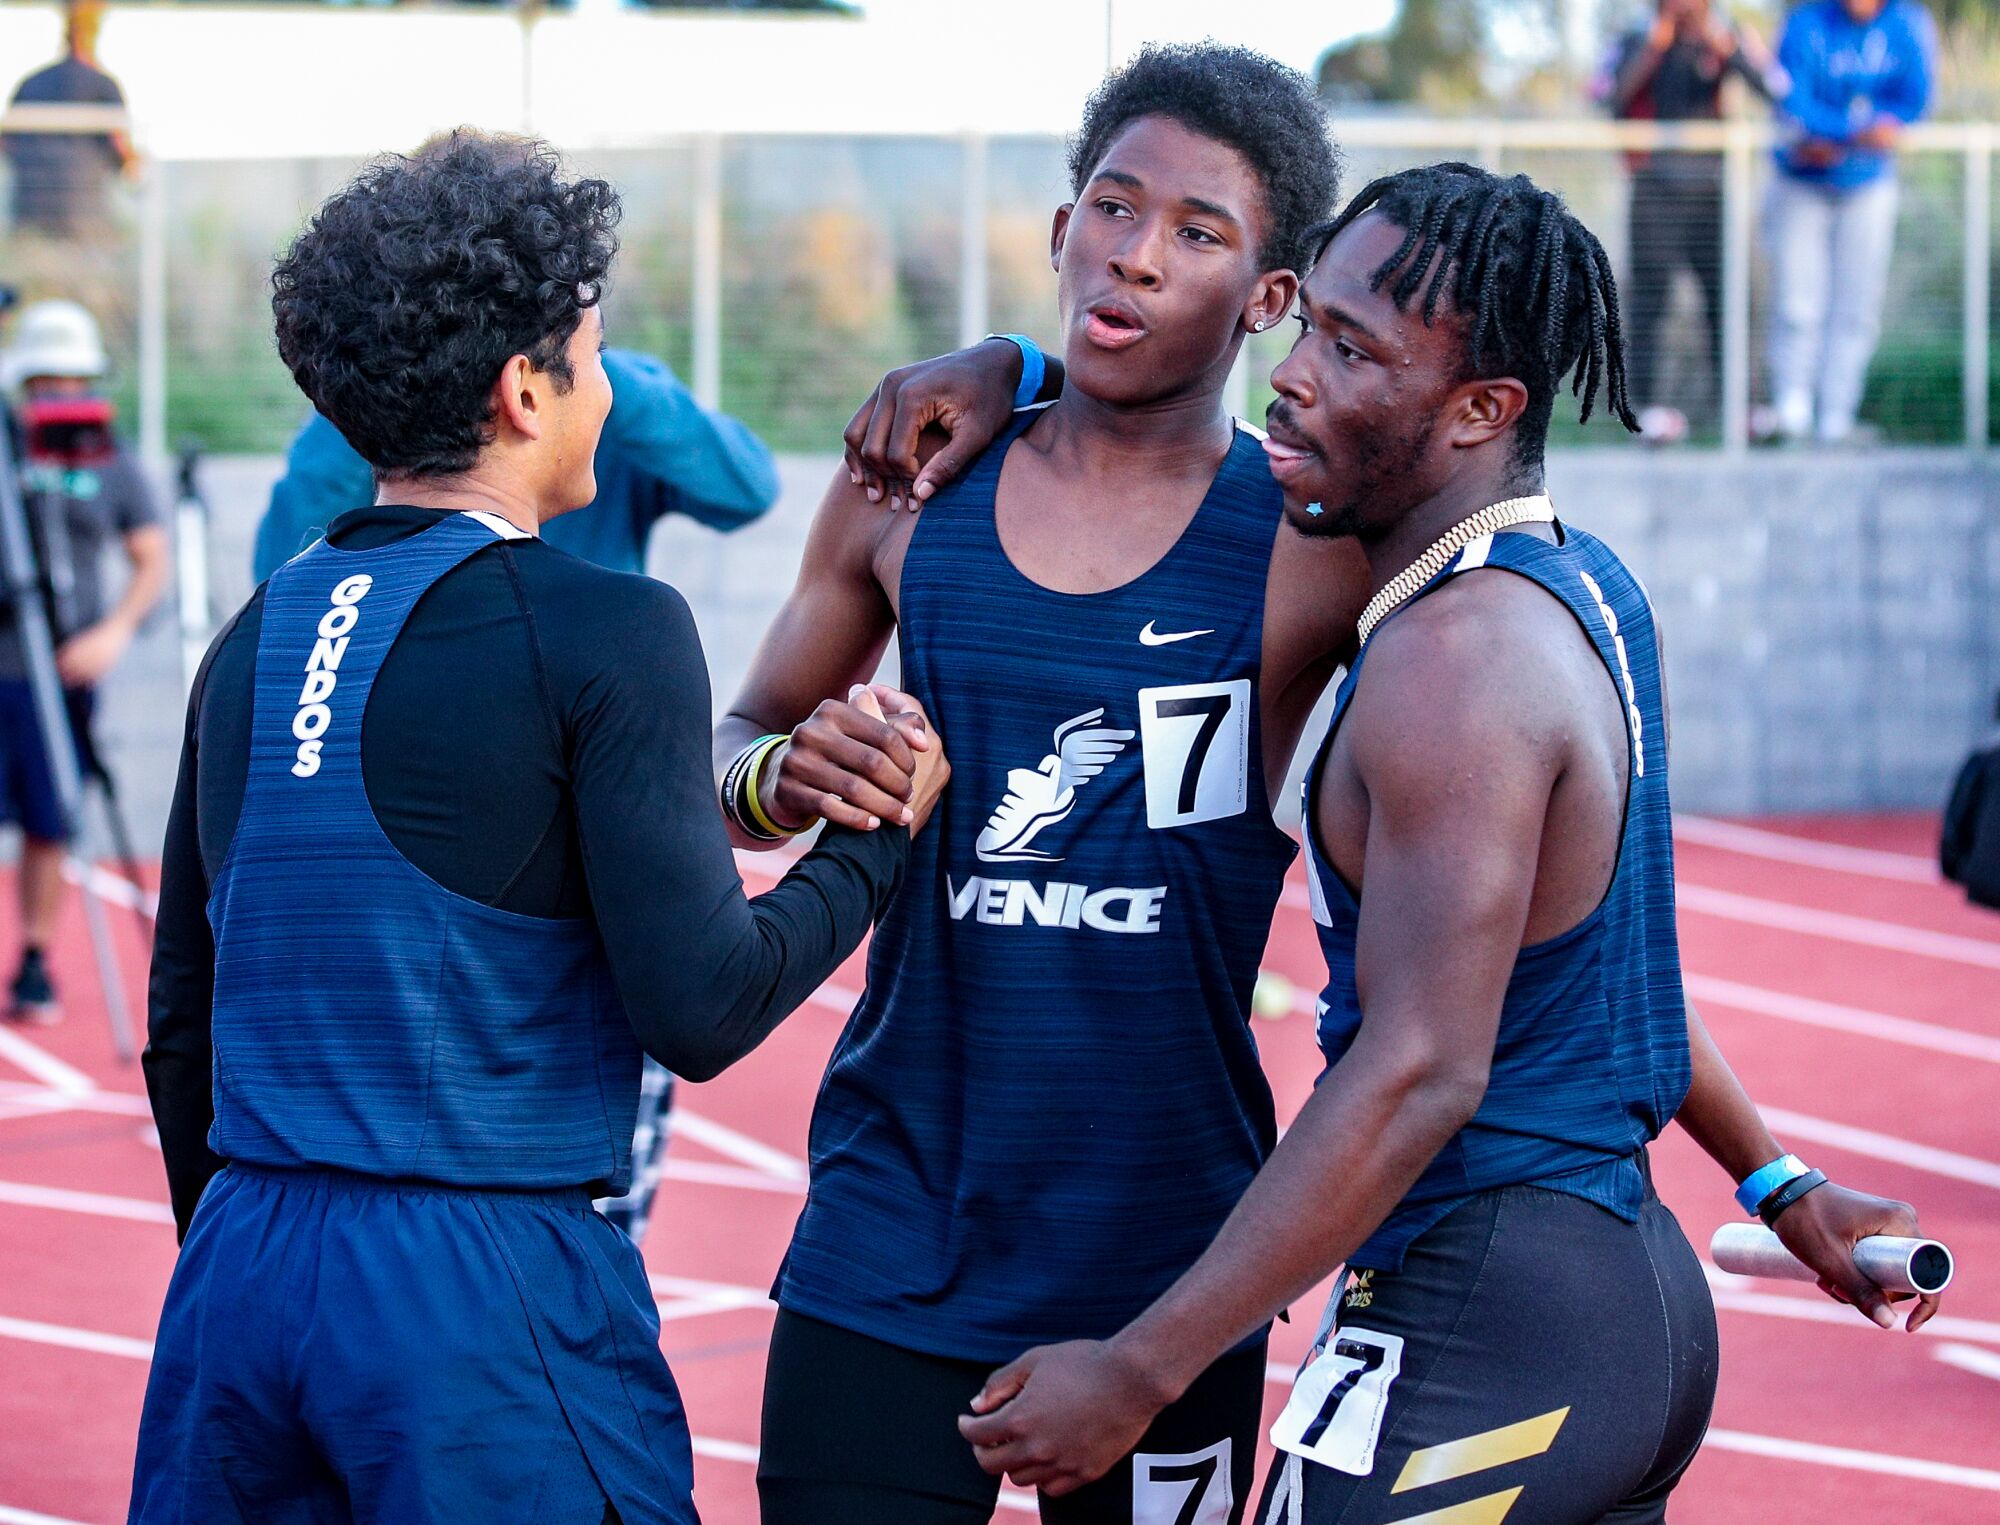 Nathan Santa Cruz (7) is congratulated by Venice teammates after his anchor leg in the 4x400 relay 